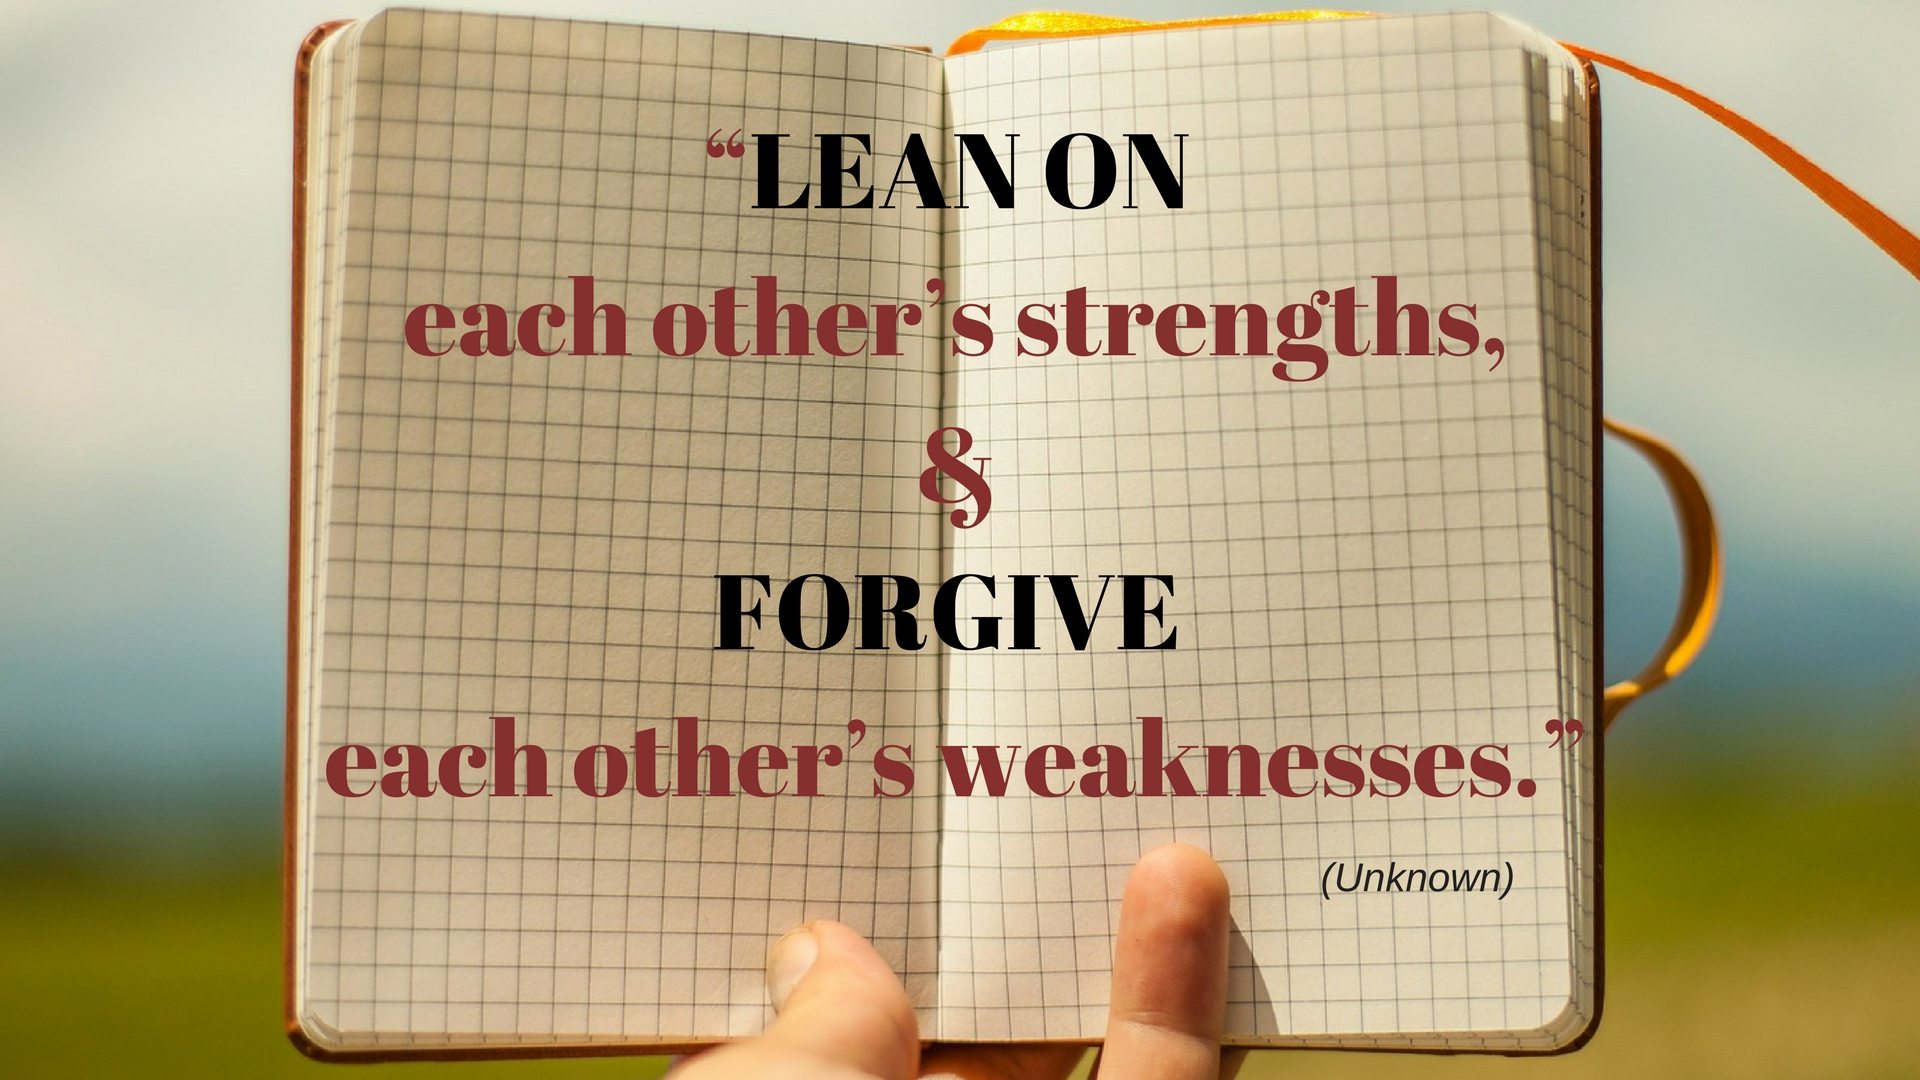 Lean on each other’s strengths - quotes that teach - Pixabay - Canva